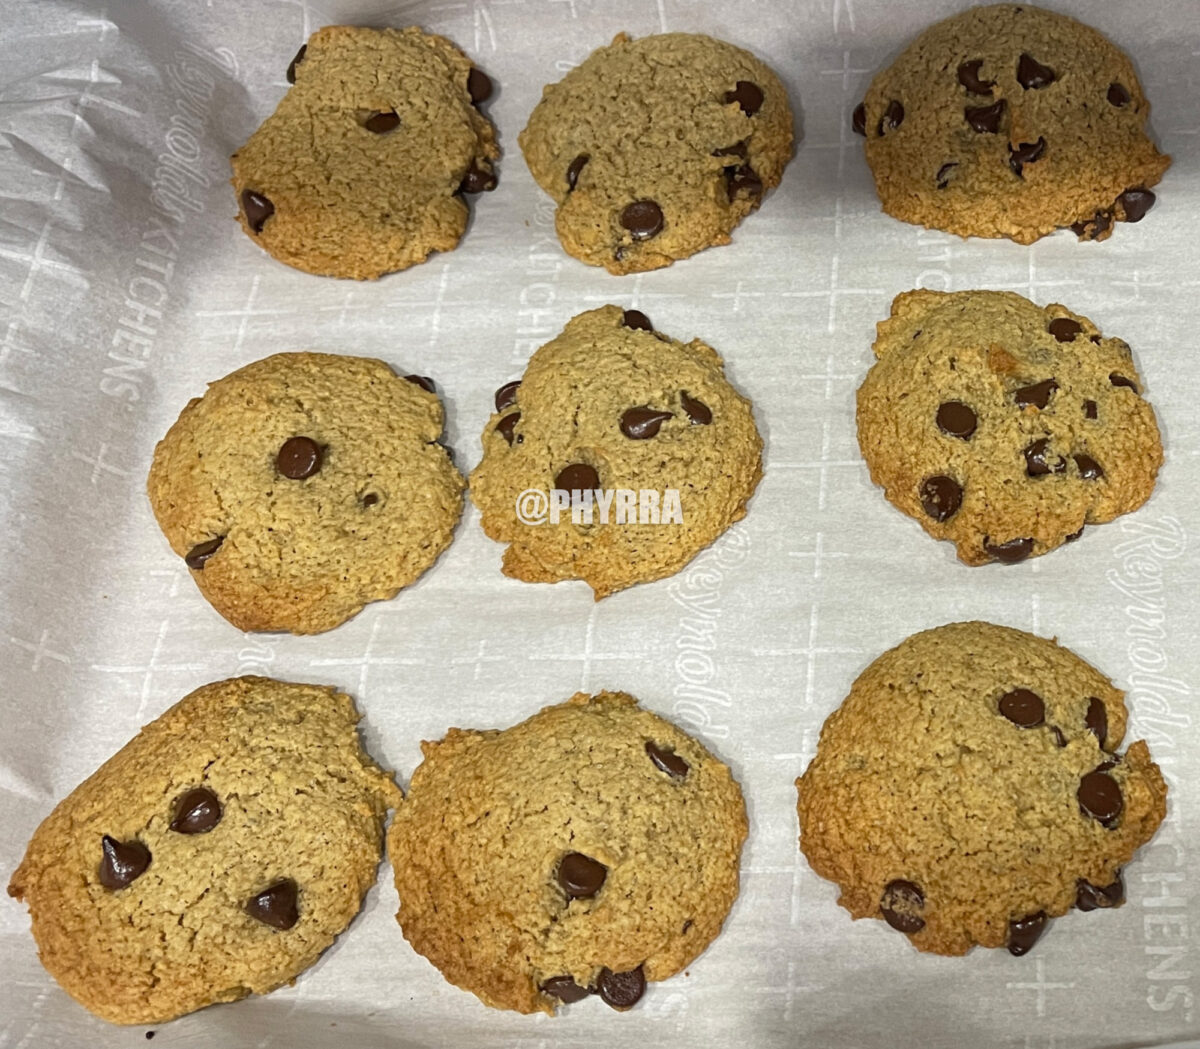 Chocolate Chip Cookies that are gluten free, low carb, and low sugar